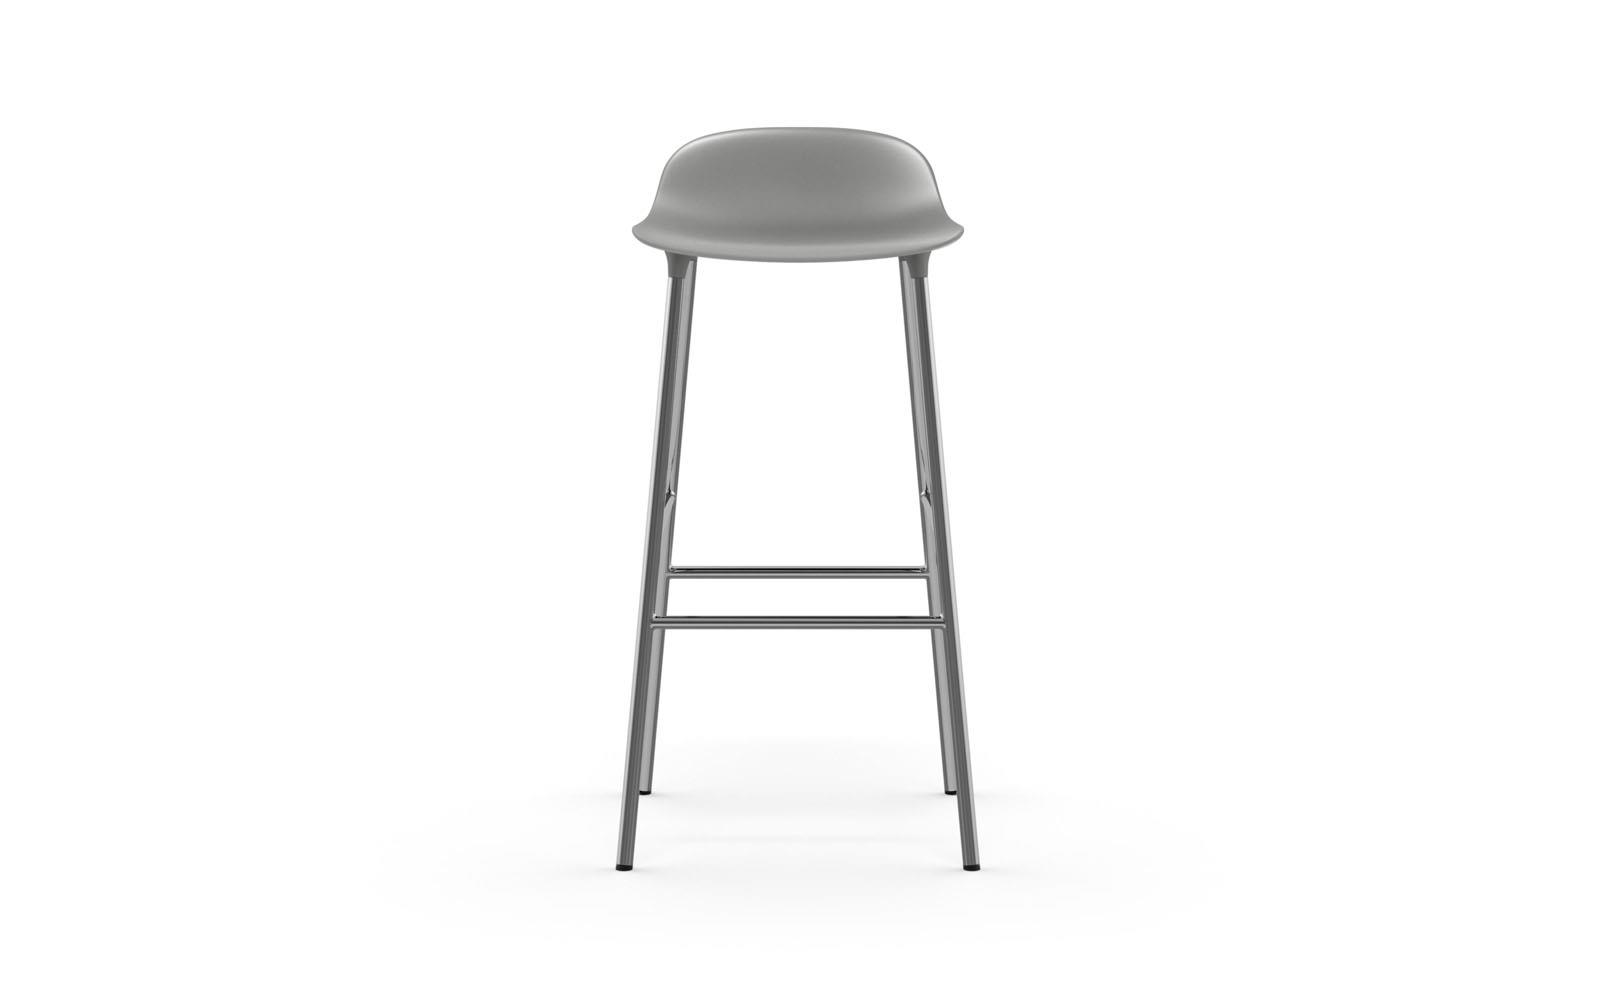 Molded Plastic S Chair With Chrome Legs, Molded Plastic Bar Stools